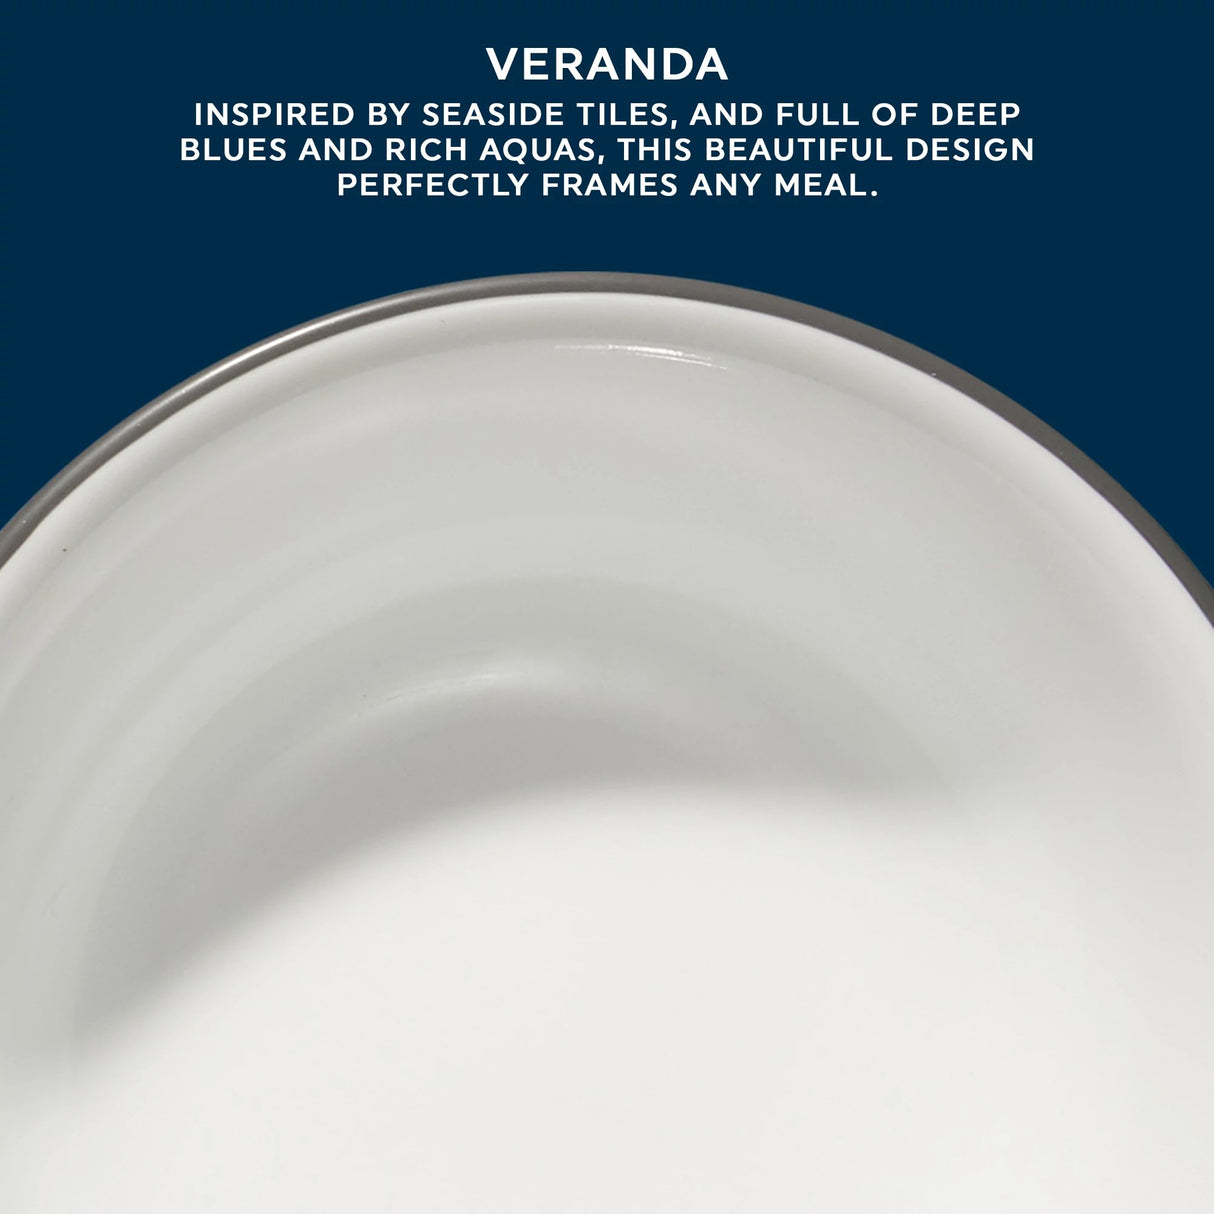  Veranda 18-ounce Cereal Bowl with text inspiered by seaside tiles